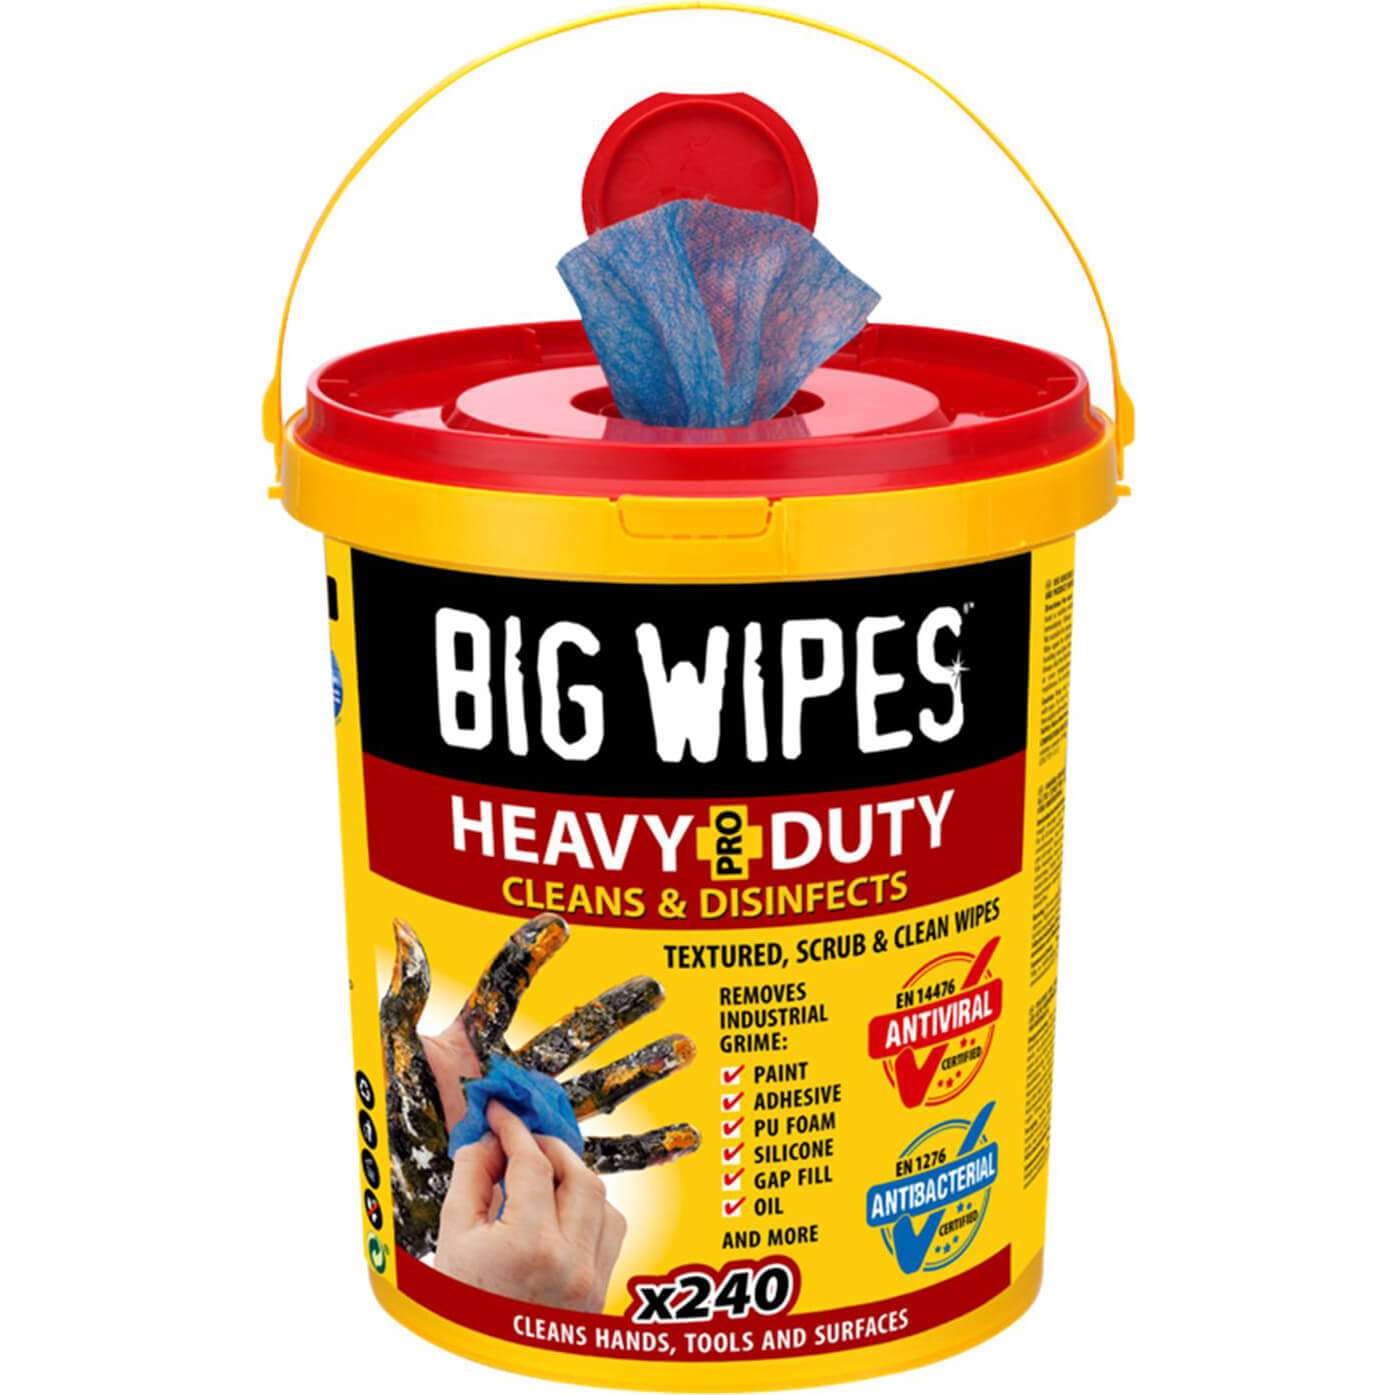 Image of Big Wipes Heavy Duty Pro Hand Cleaning Wipes Pack of 240